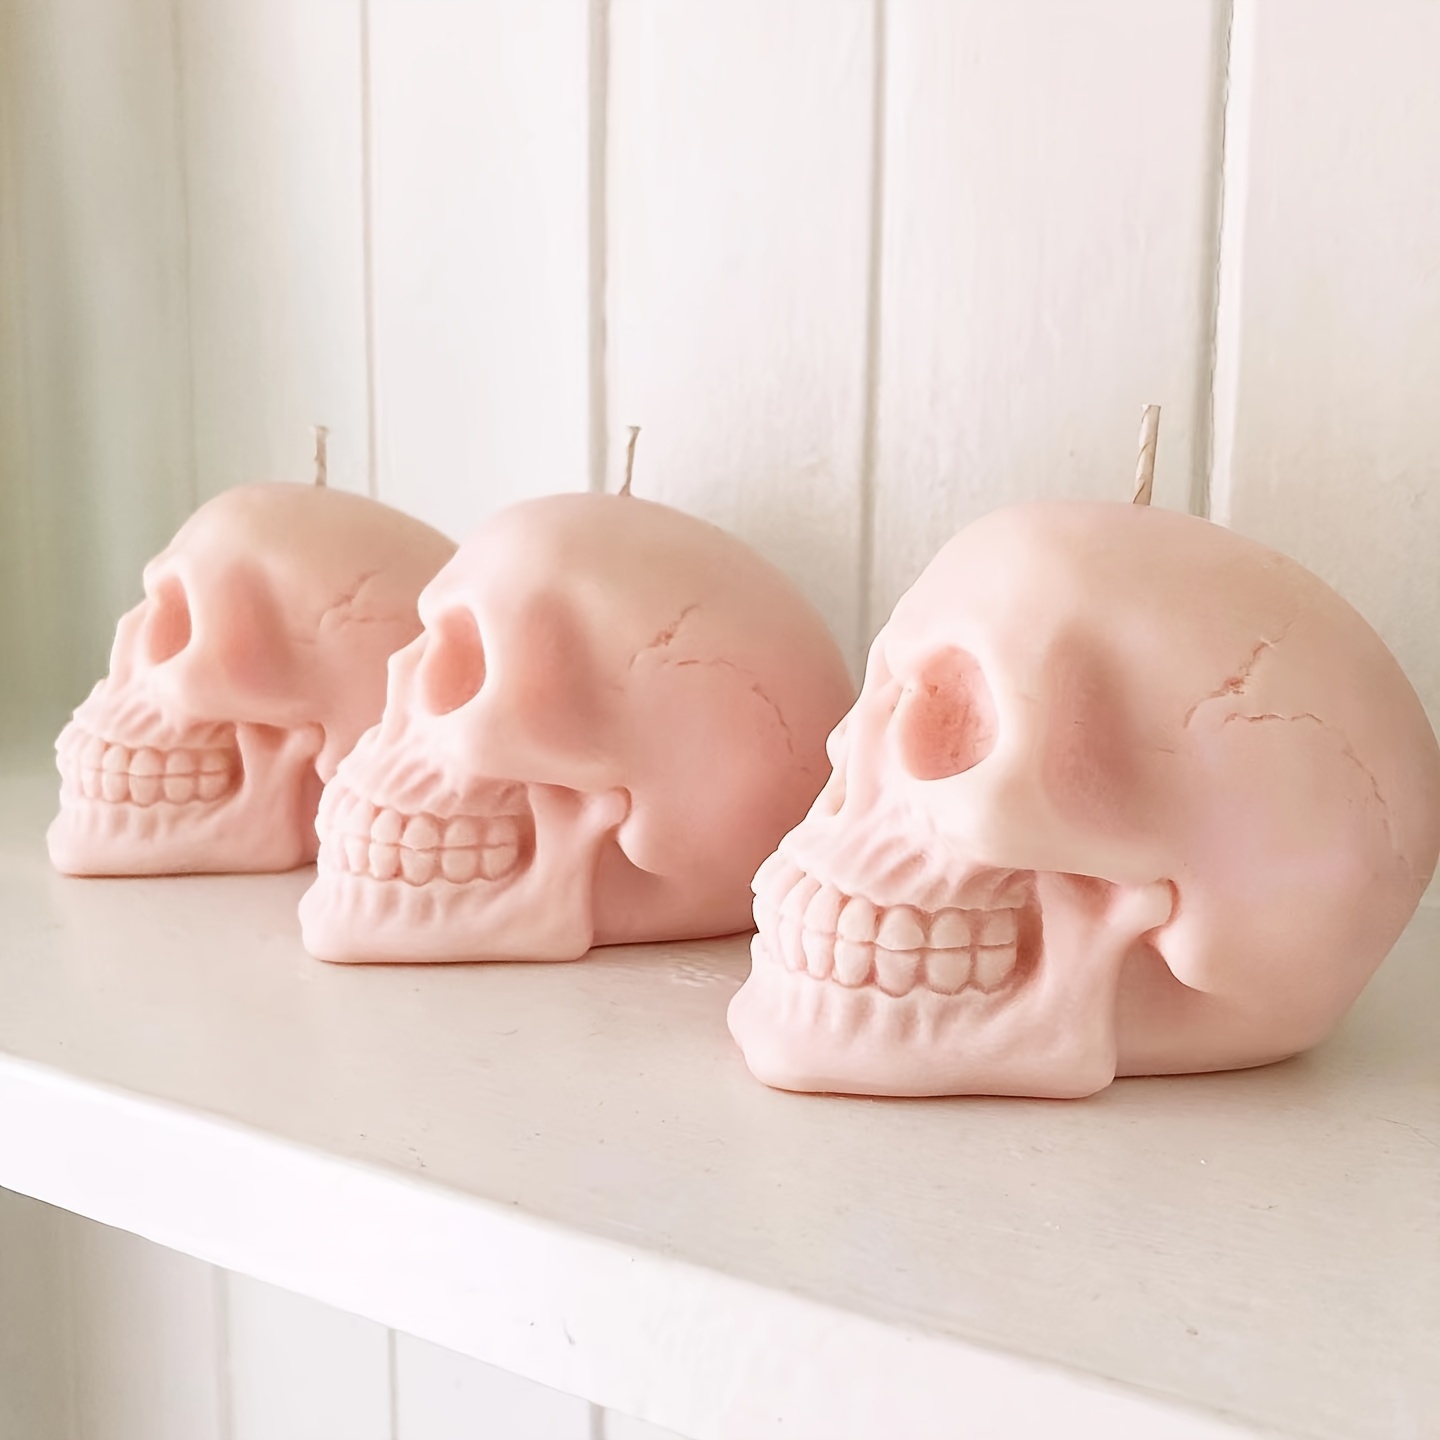 Skull Mold, Funstorm 3D Skull Silicone Molds for Resin, with Exact Detail, Upgraded Skull Epoxy Resin Molds for Candle Making, Resin Casting Art